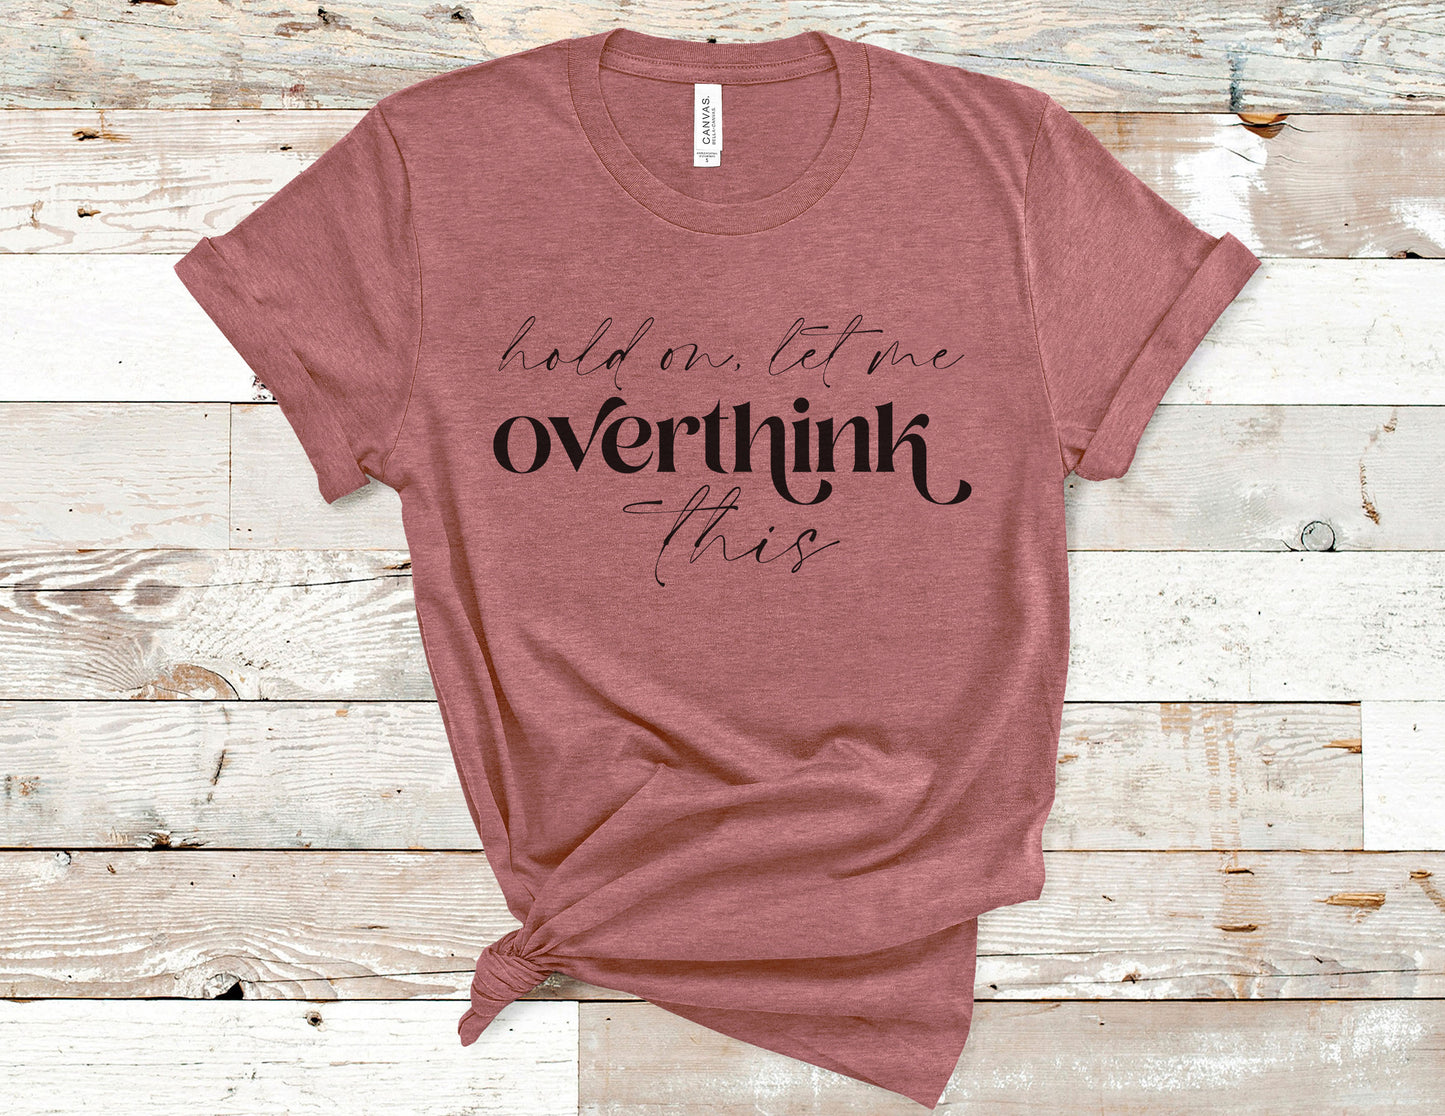 Hold on, let me overthink this Tee